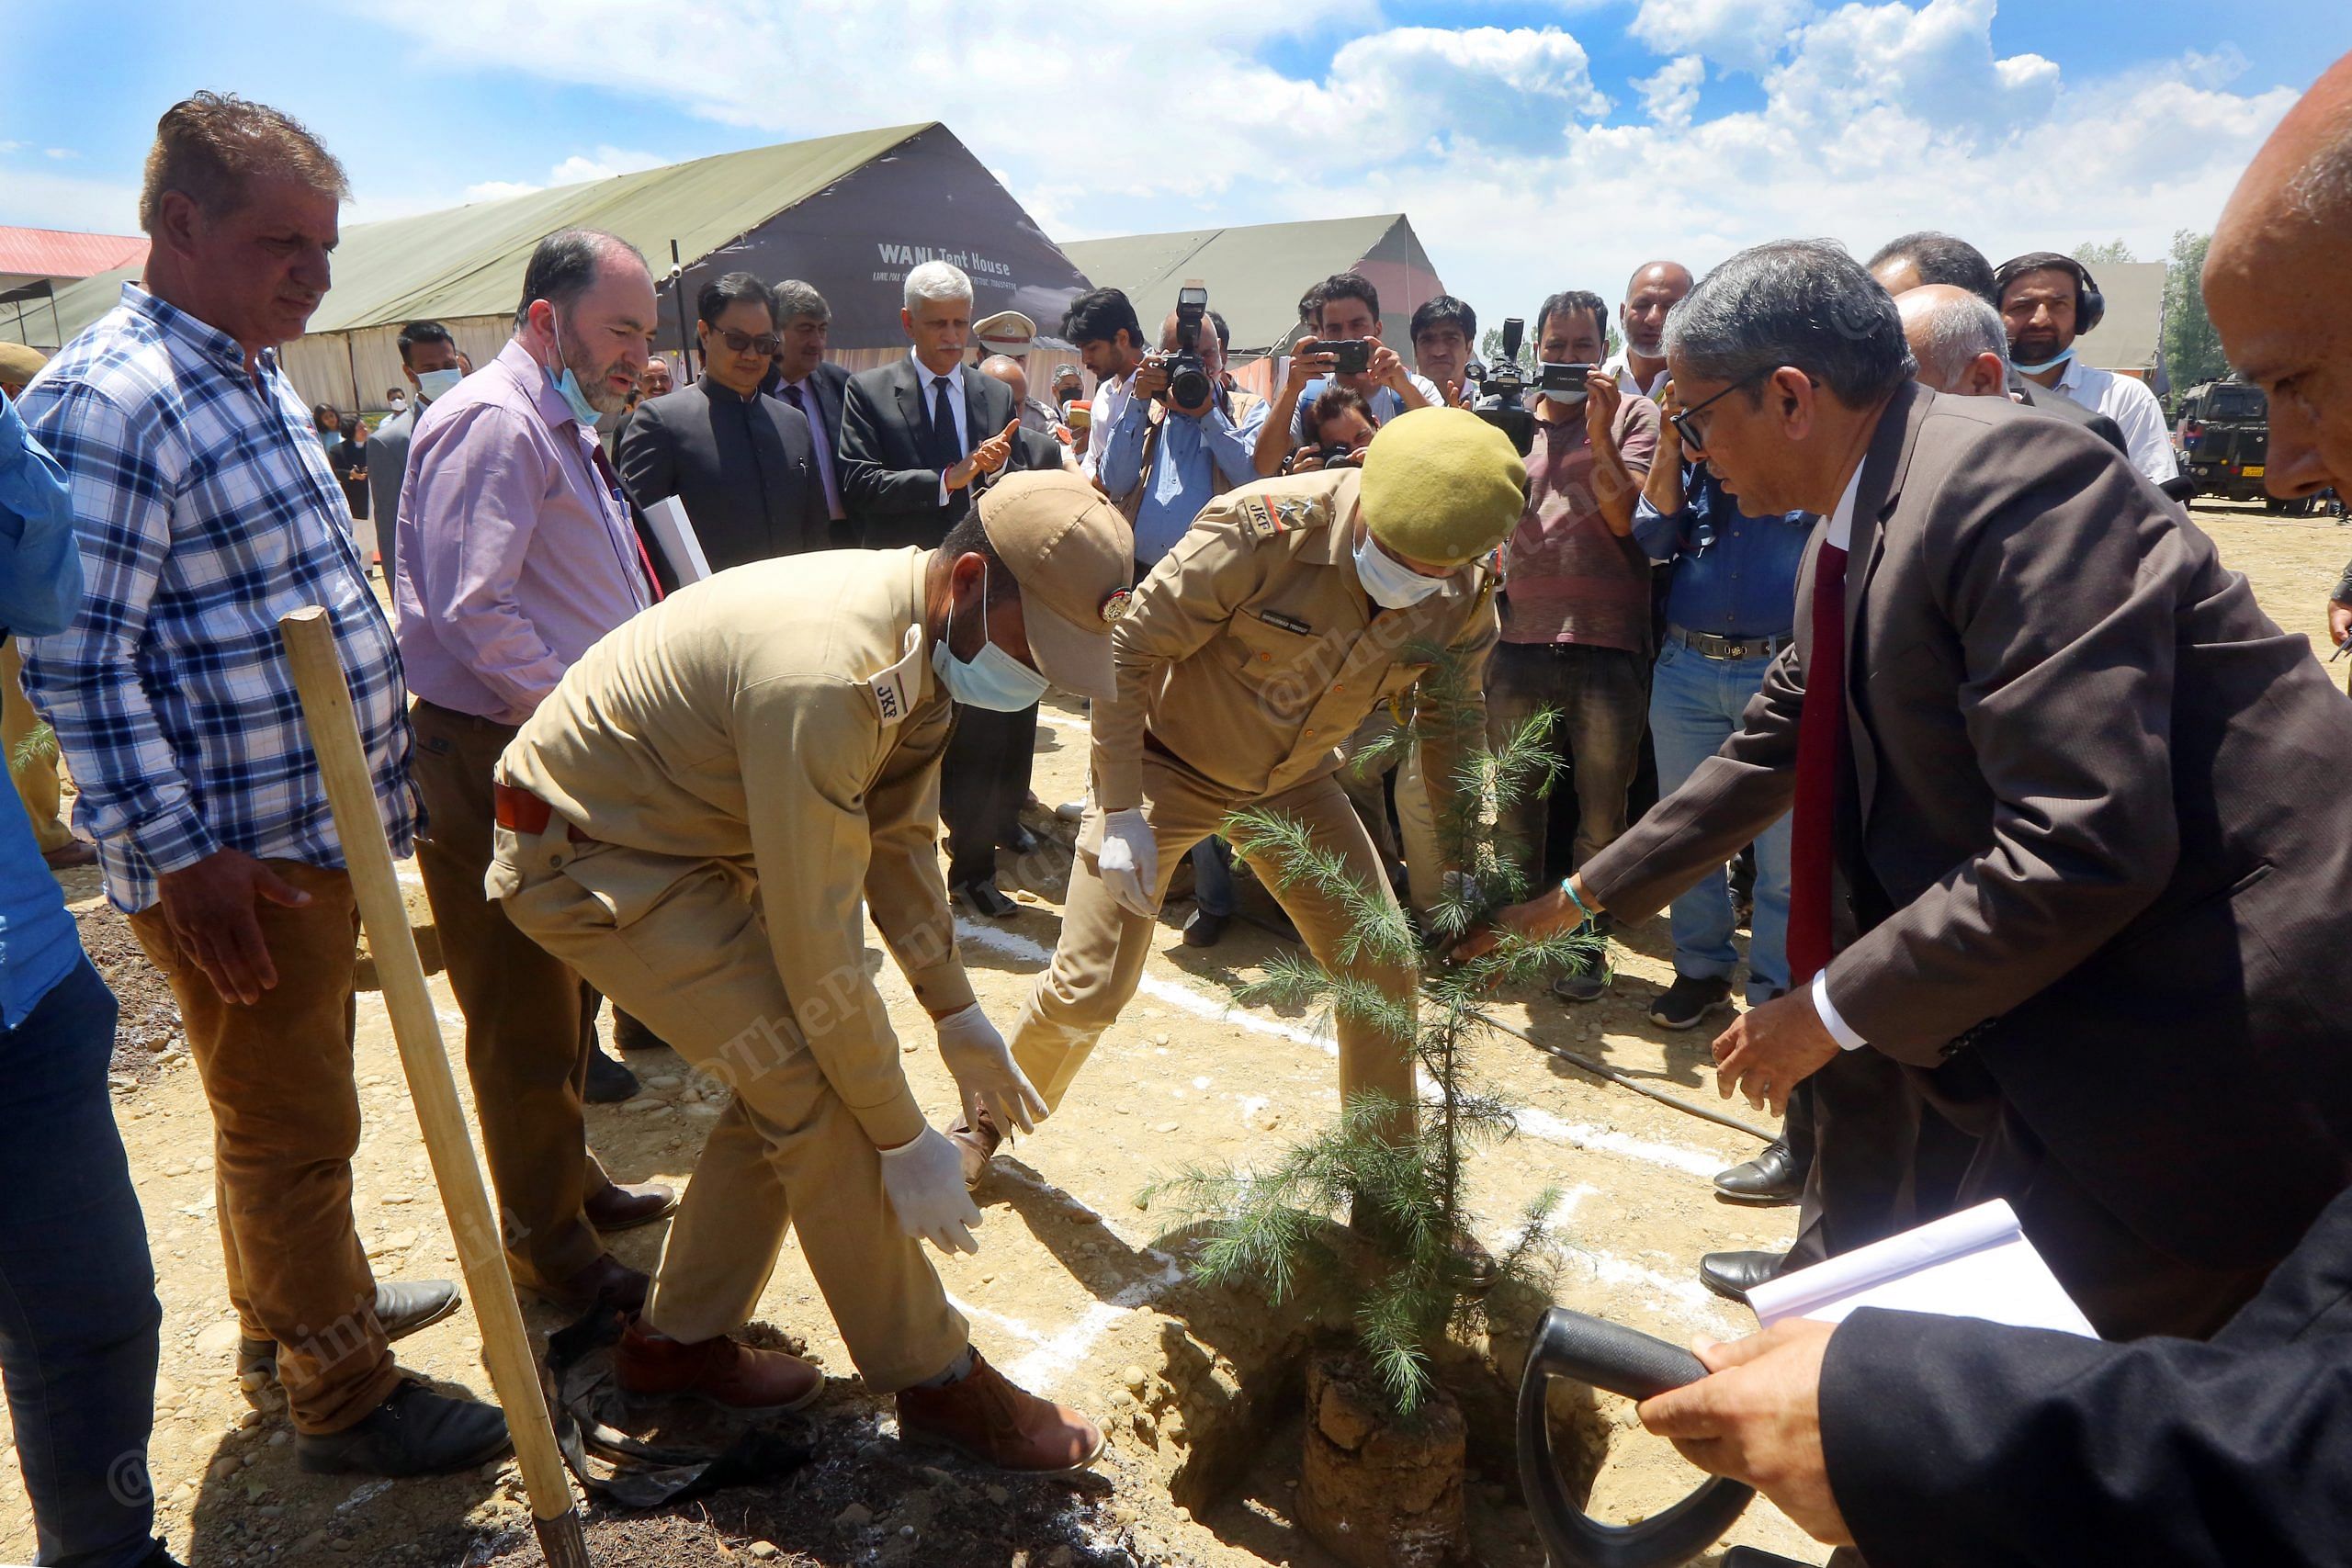 CJI Ramana plants a tree during the foundation stone laying of the new high court complex in Srinagar | Photo: Praveen Jain | ThePrint